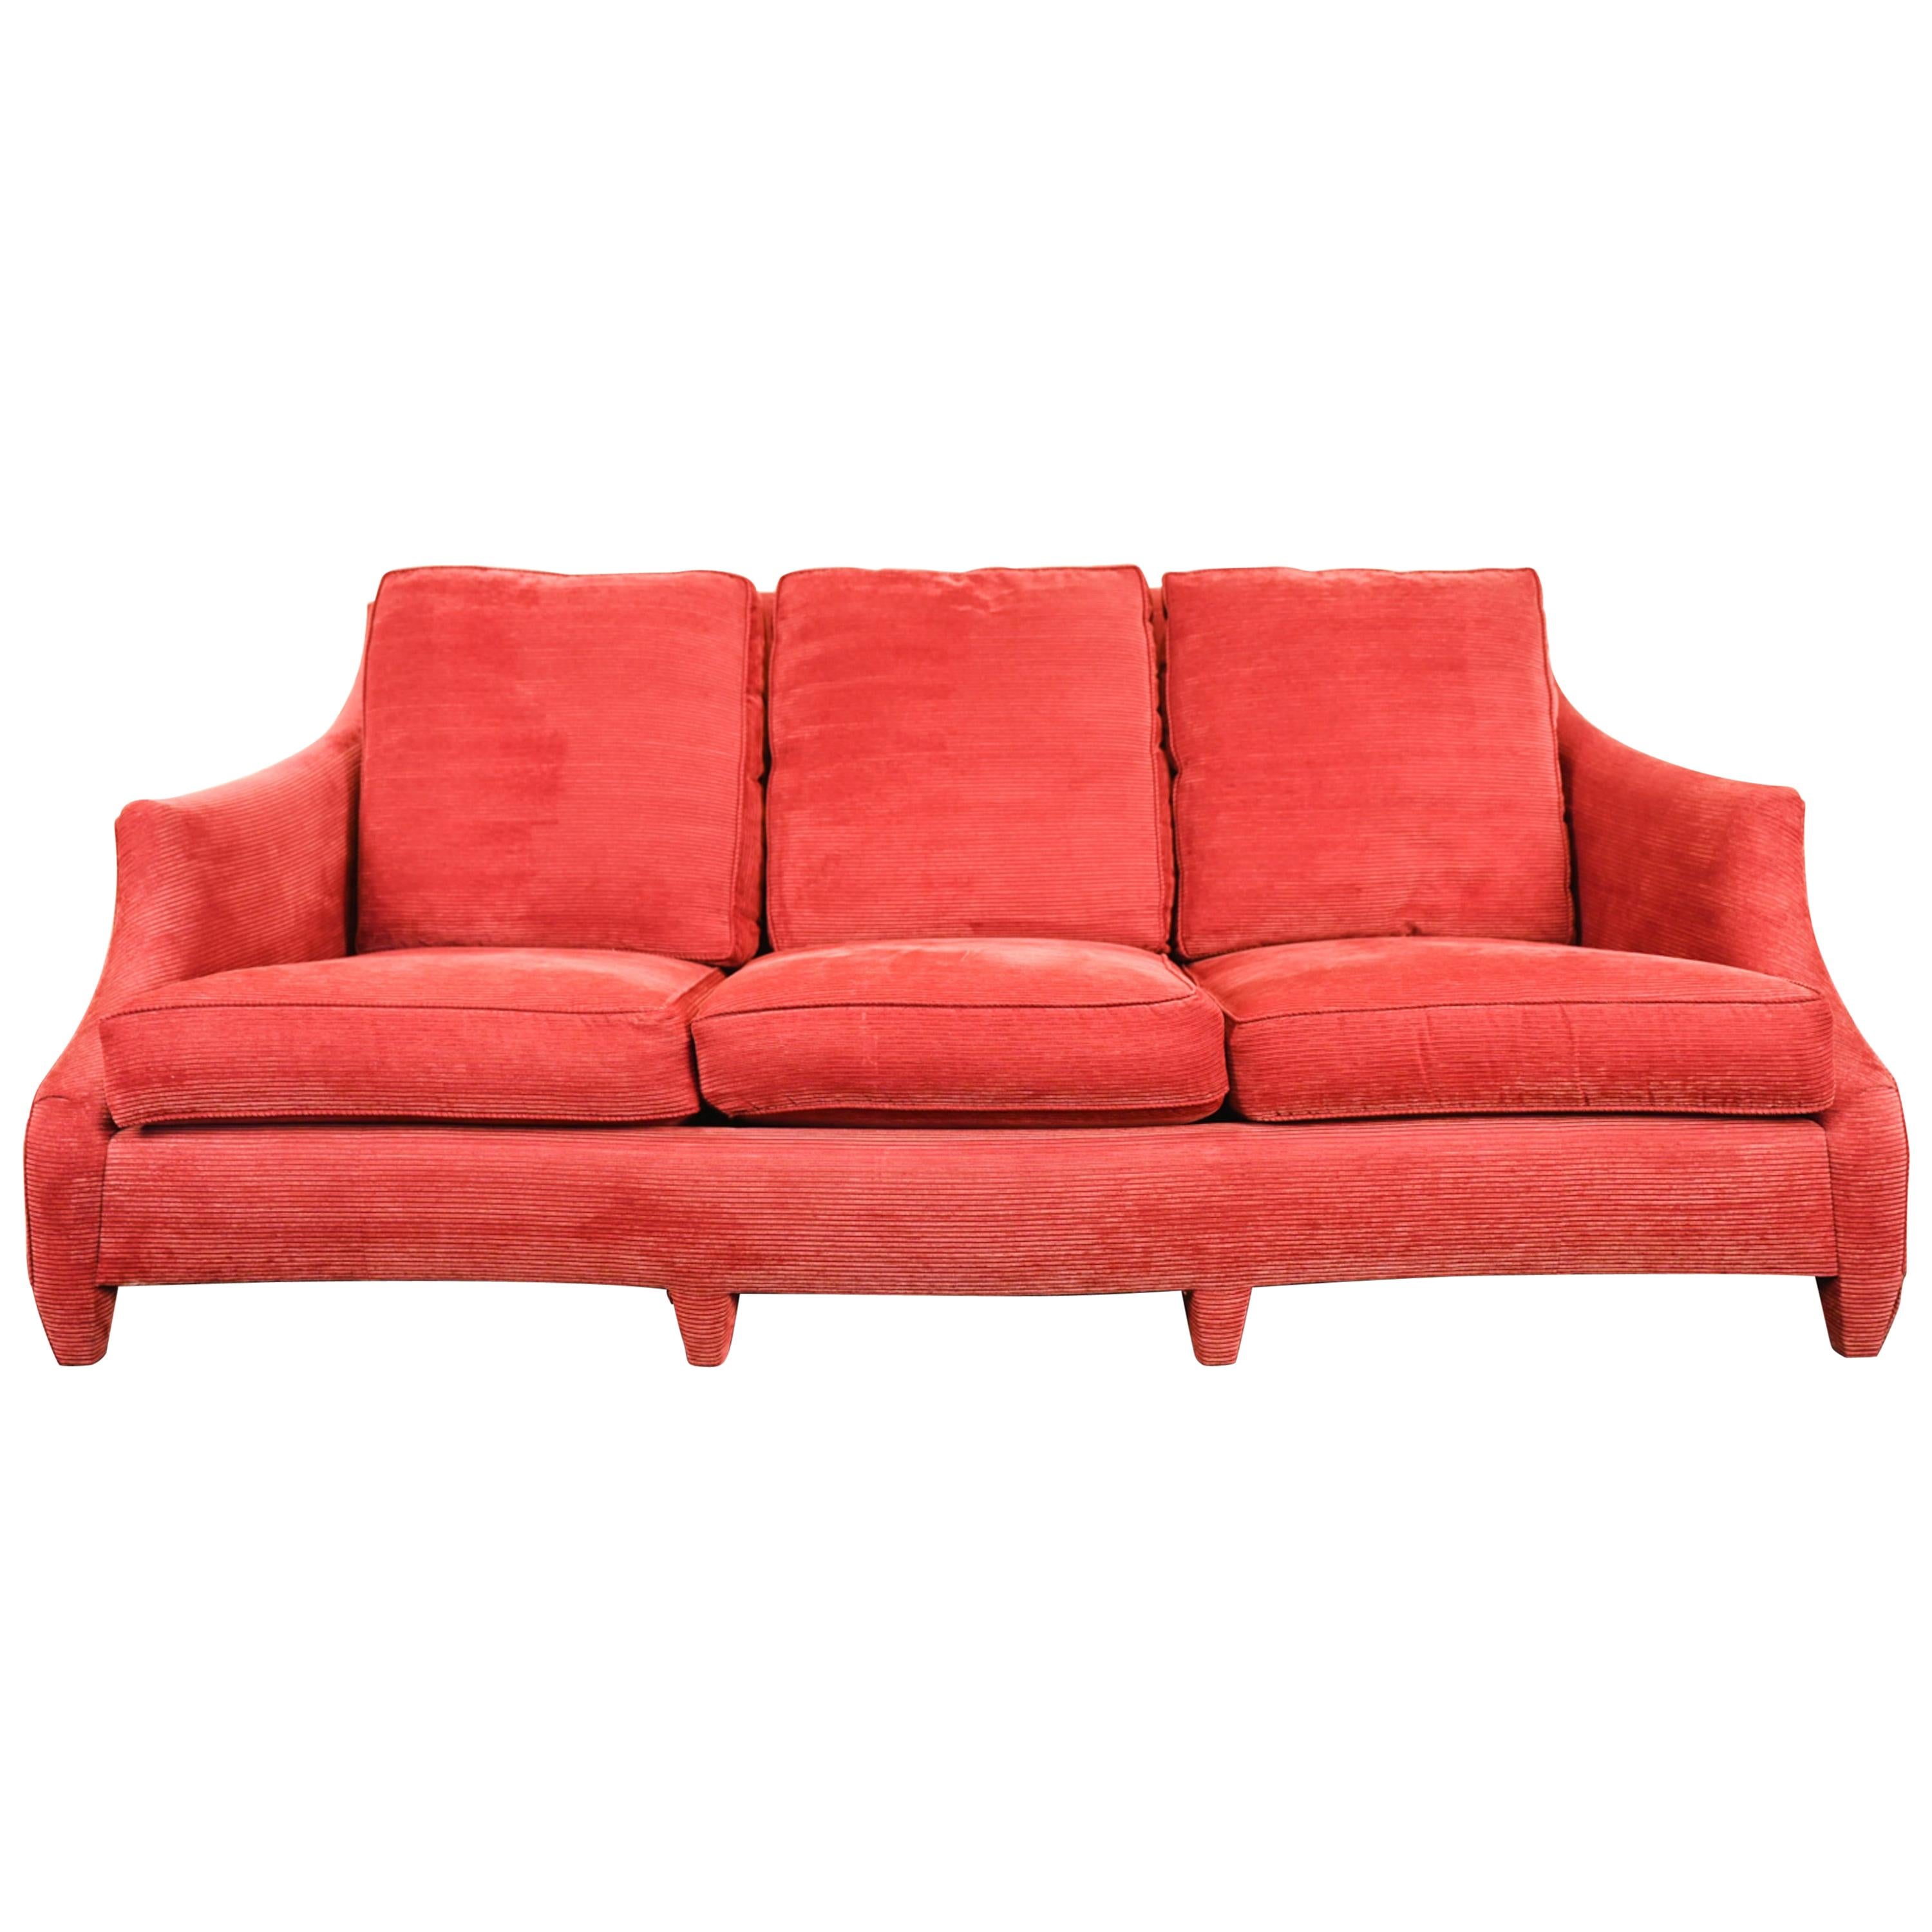 John Hutton for Donghia "Ogee" Sofa, Corded Chenille Upholstery